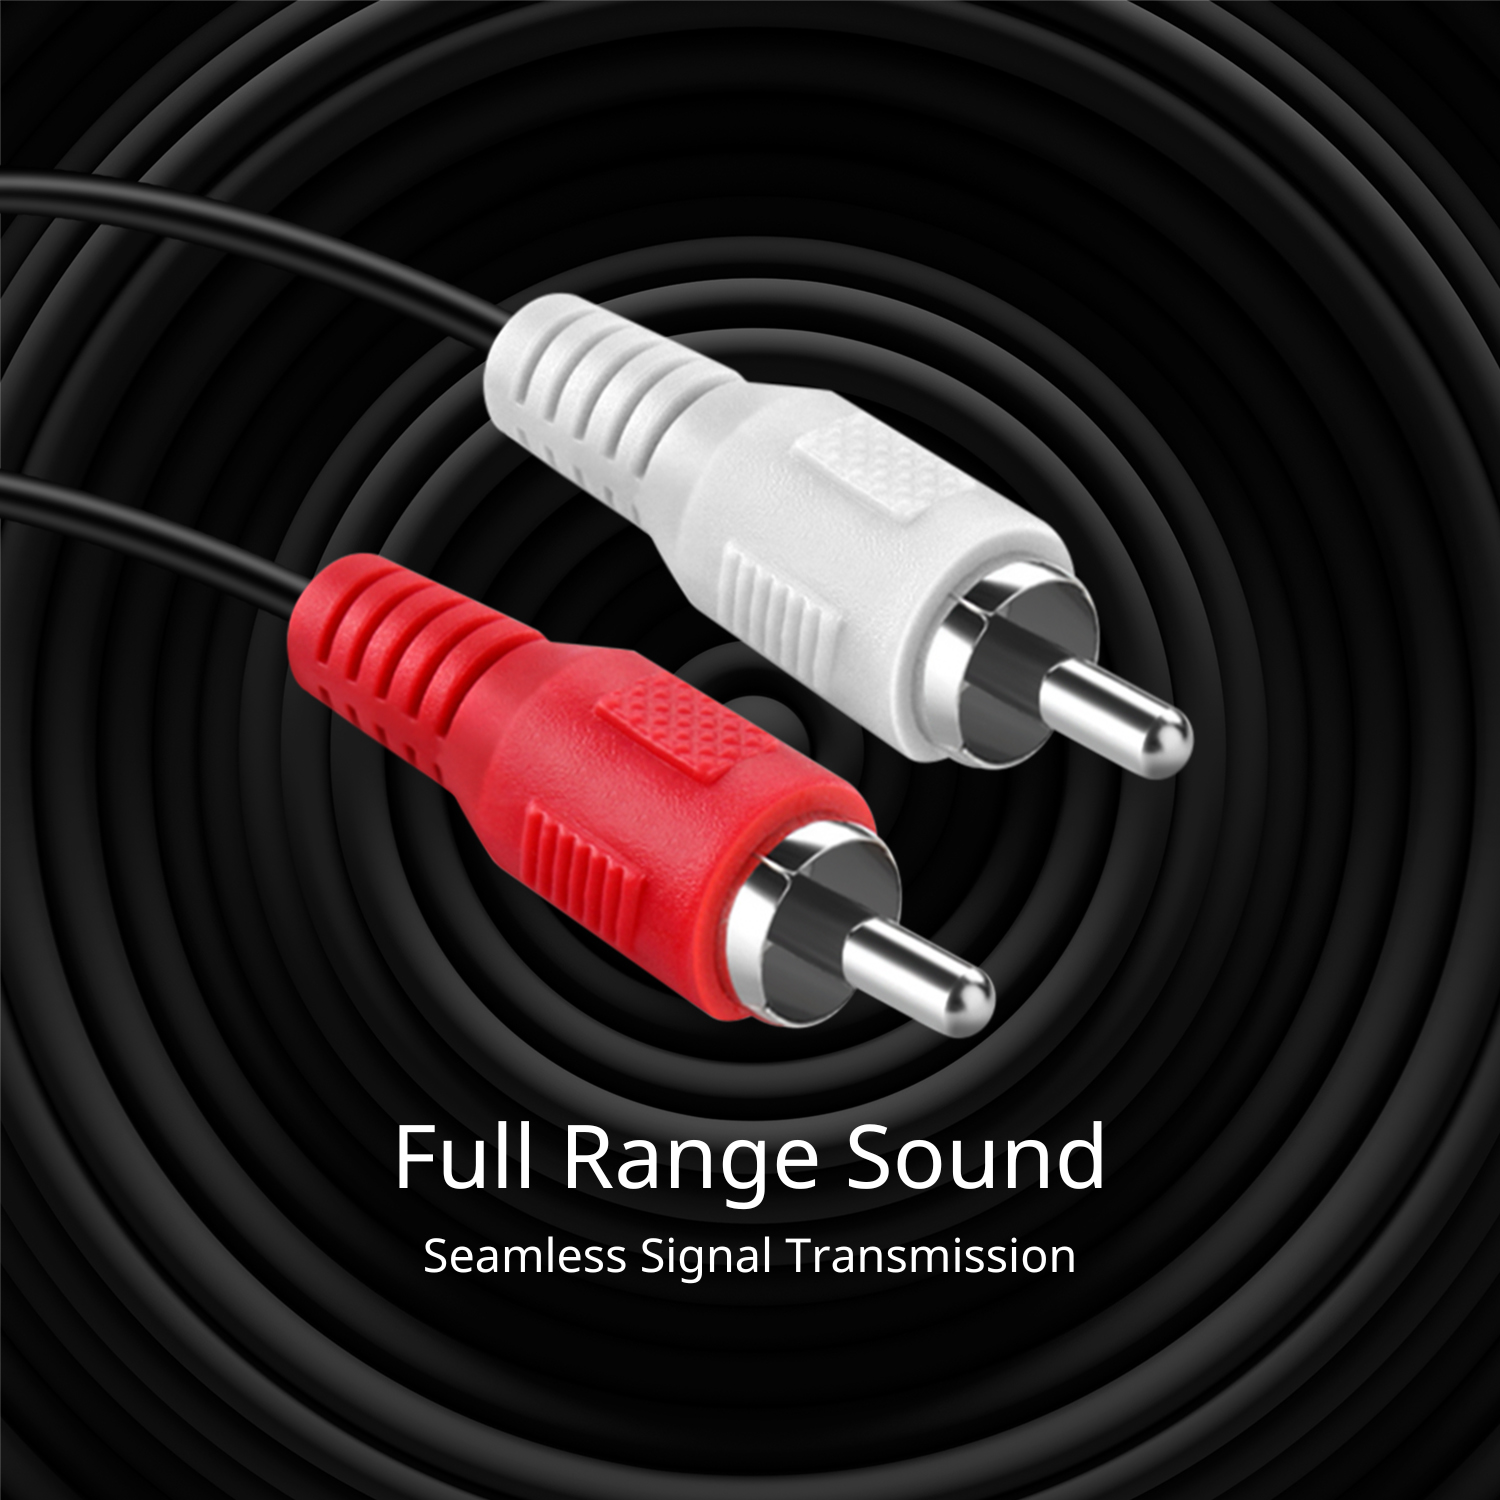 2RCA Stereo Audio Cable (10 Feet) - Dual Composite RCA Male Connector M/M 2 Channel (Right and Left) (Red and White) Shielded 2RCA to 2RCA AV Sound Plug Jack Wire Cord - image 4 of 6